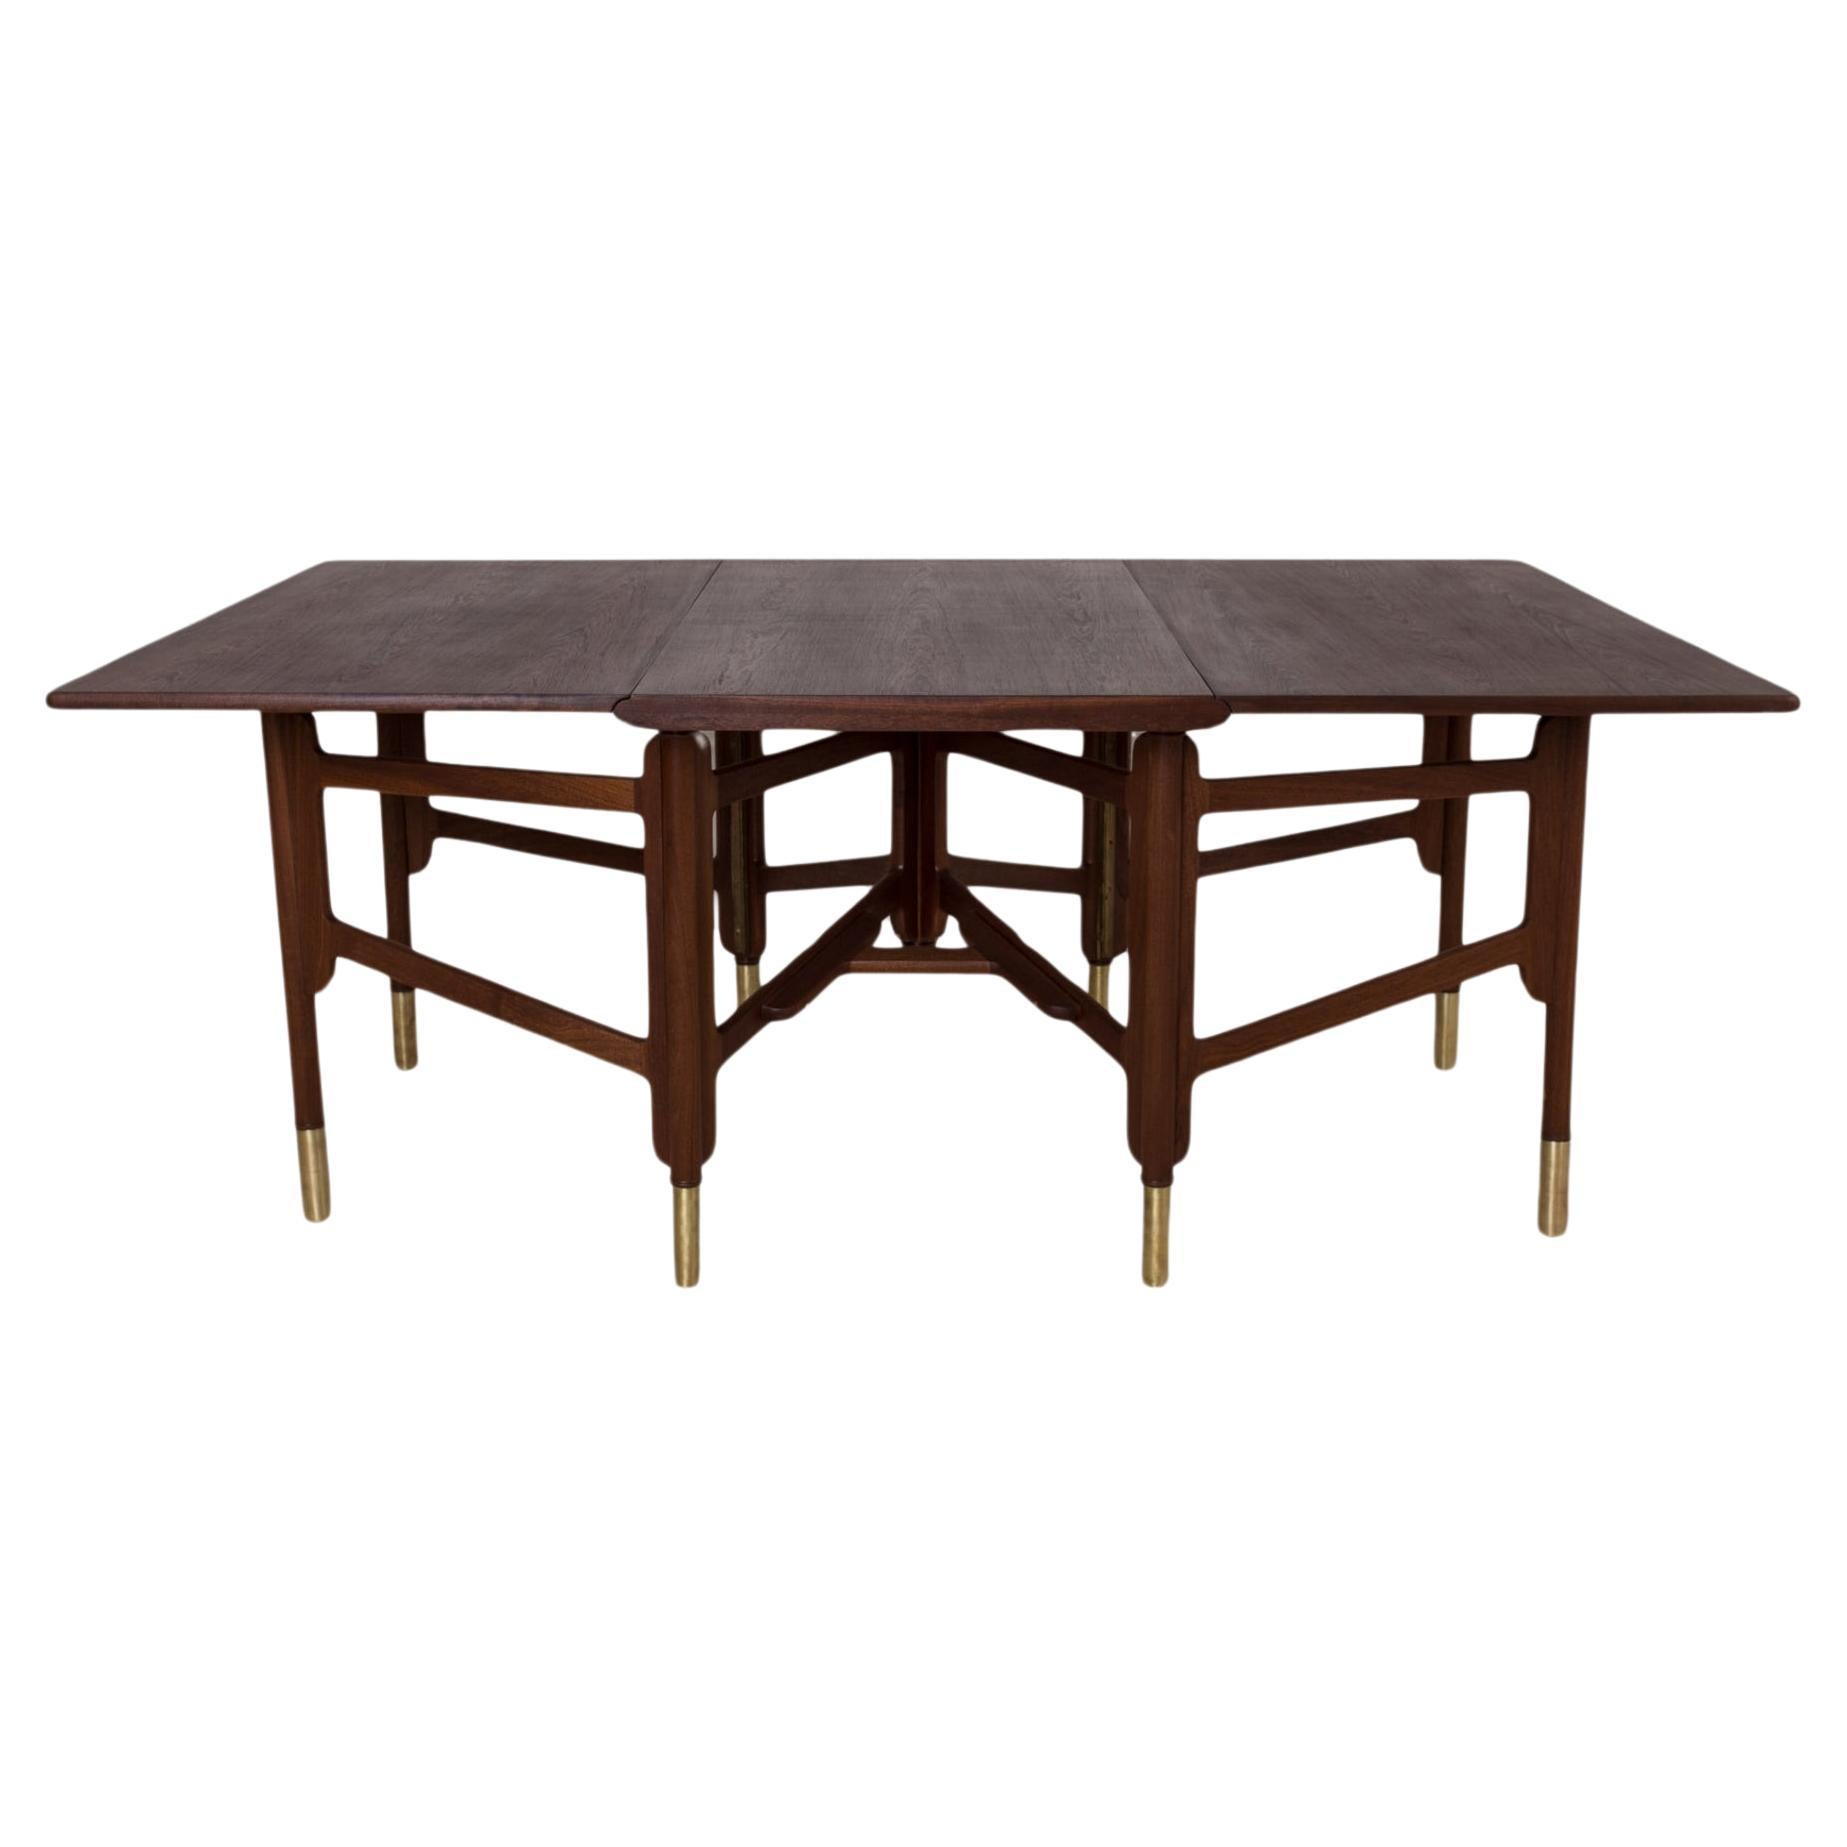 Midcentury Dining Table, Teak Wood, Brass Elements, Norway, 1950s For Sale